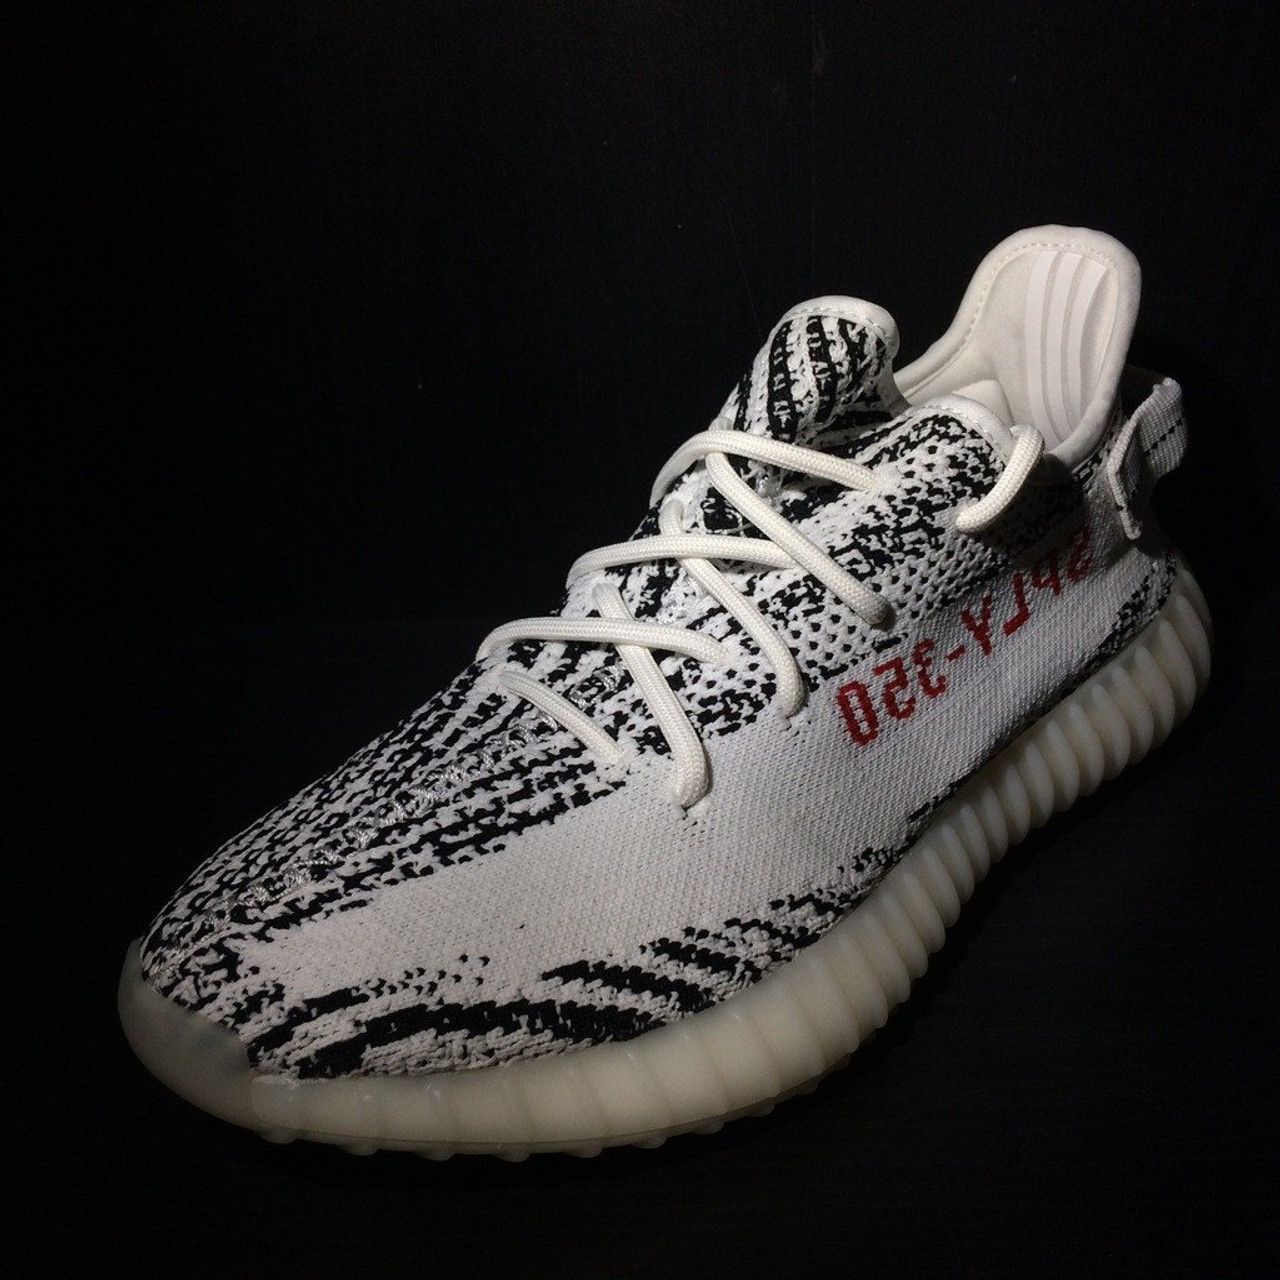 Supreme Yeezy 350 Zebra Size 8 for Sale in Los Angeles, CA - OfferUp